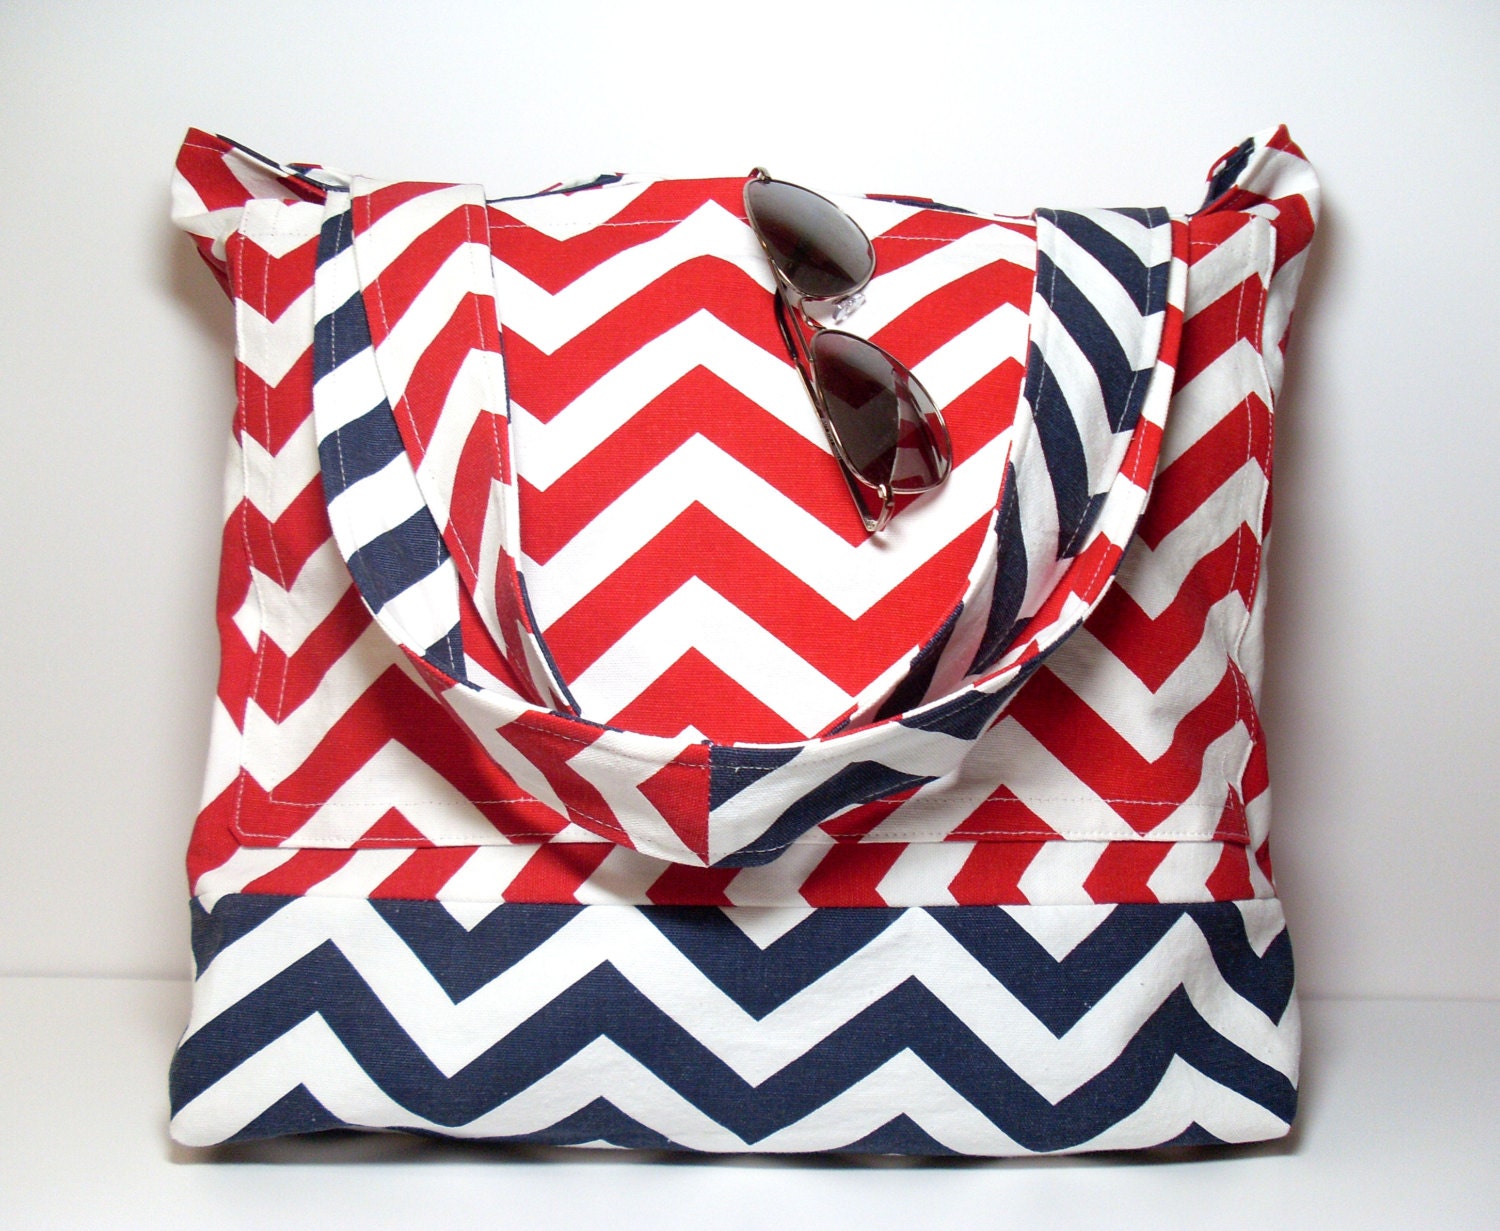 Reversible Beach Tote - 4th of July - Summer Bag - Chevron Nautical- Red White Blue - Made To Order - jayciMay